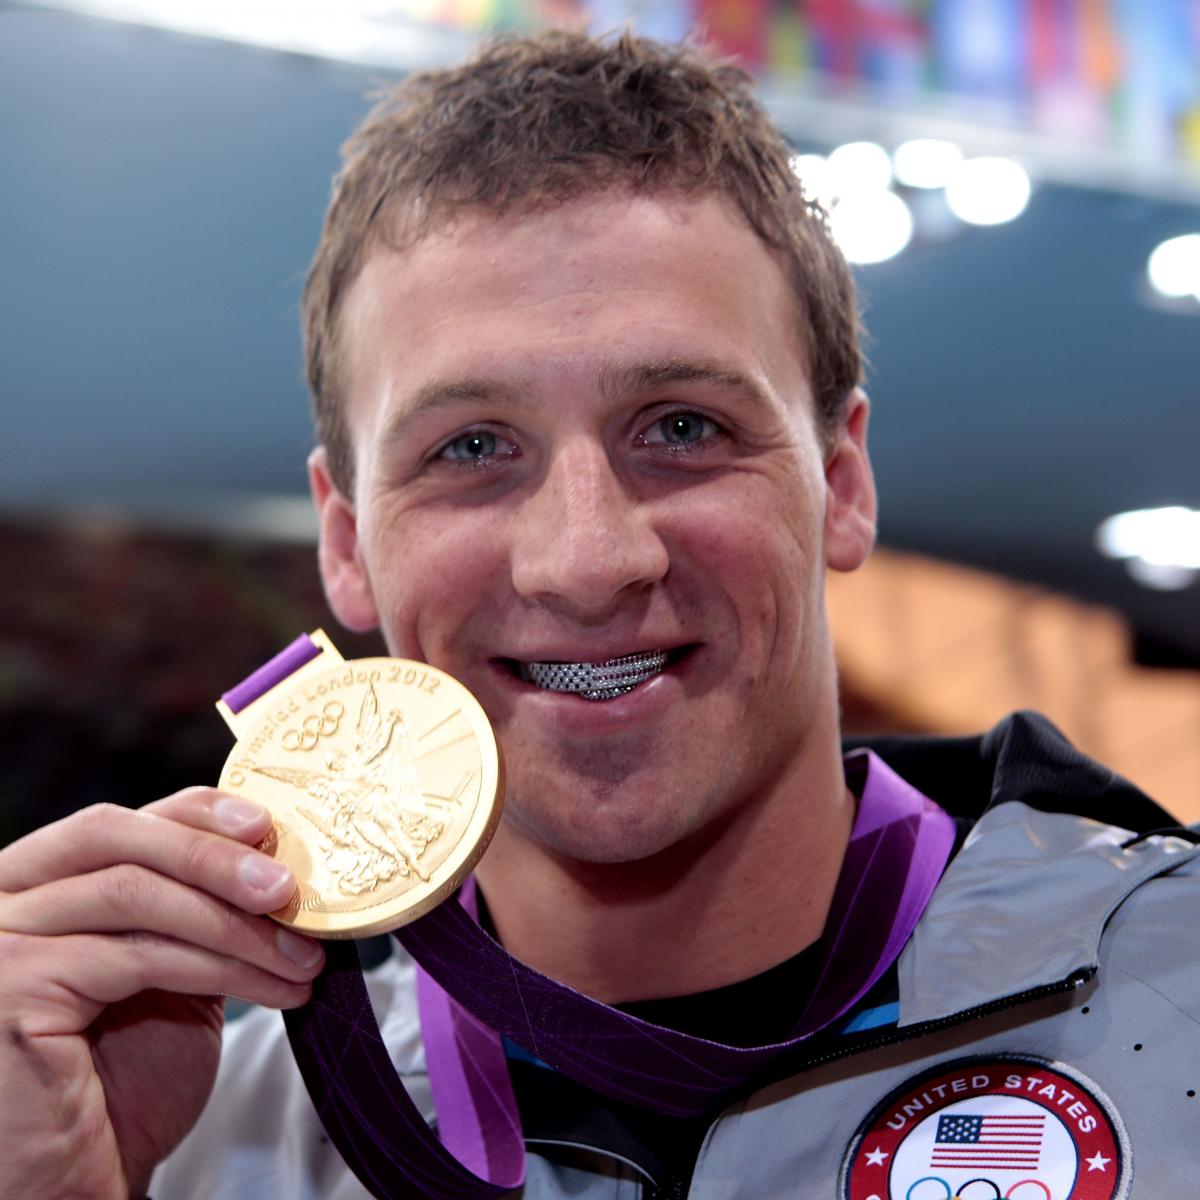 Ryan Lochte Grill: Controversial Mouthpiece Adds Intrigue to USA